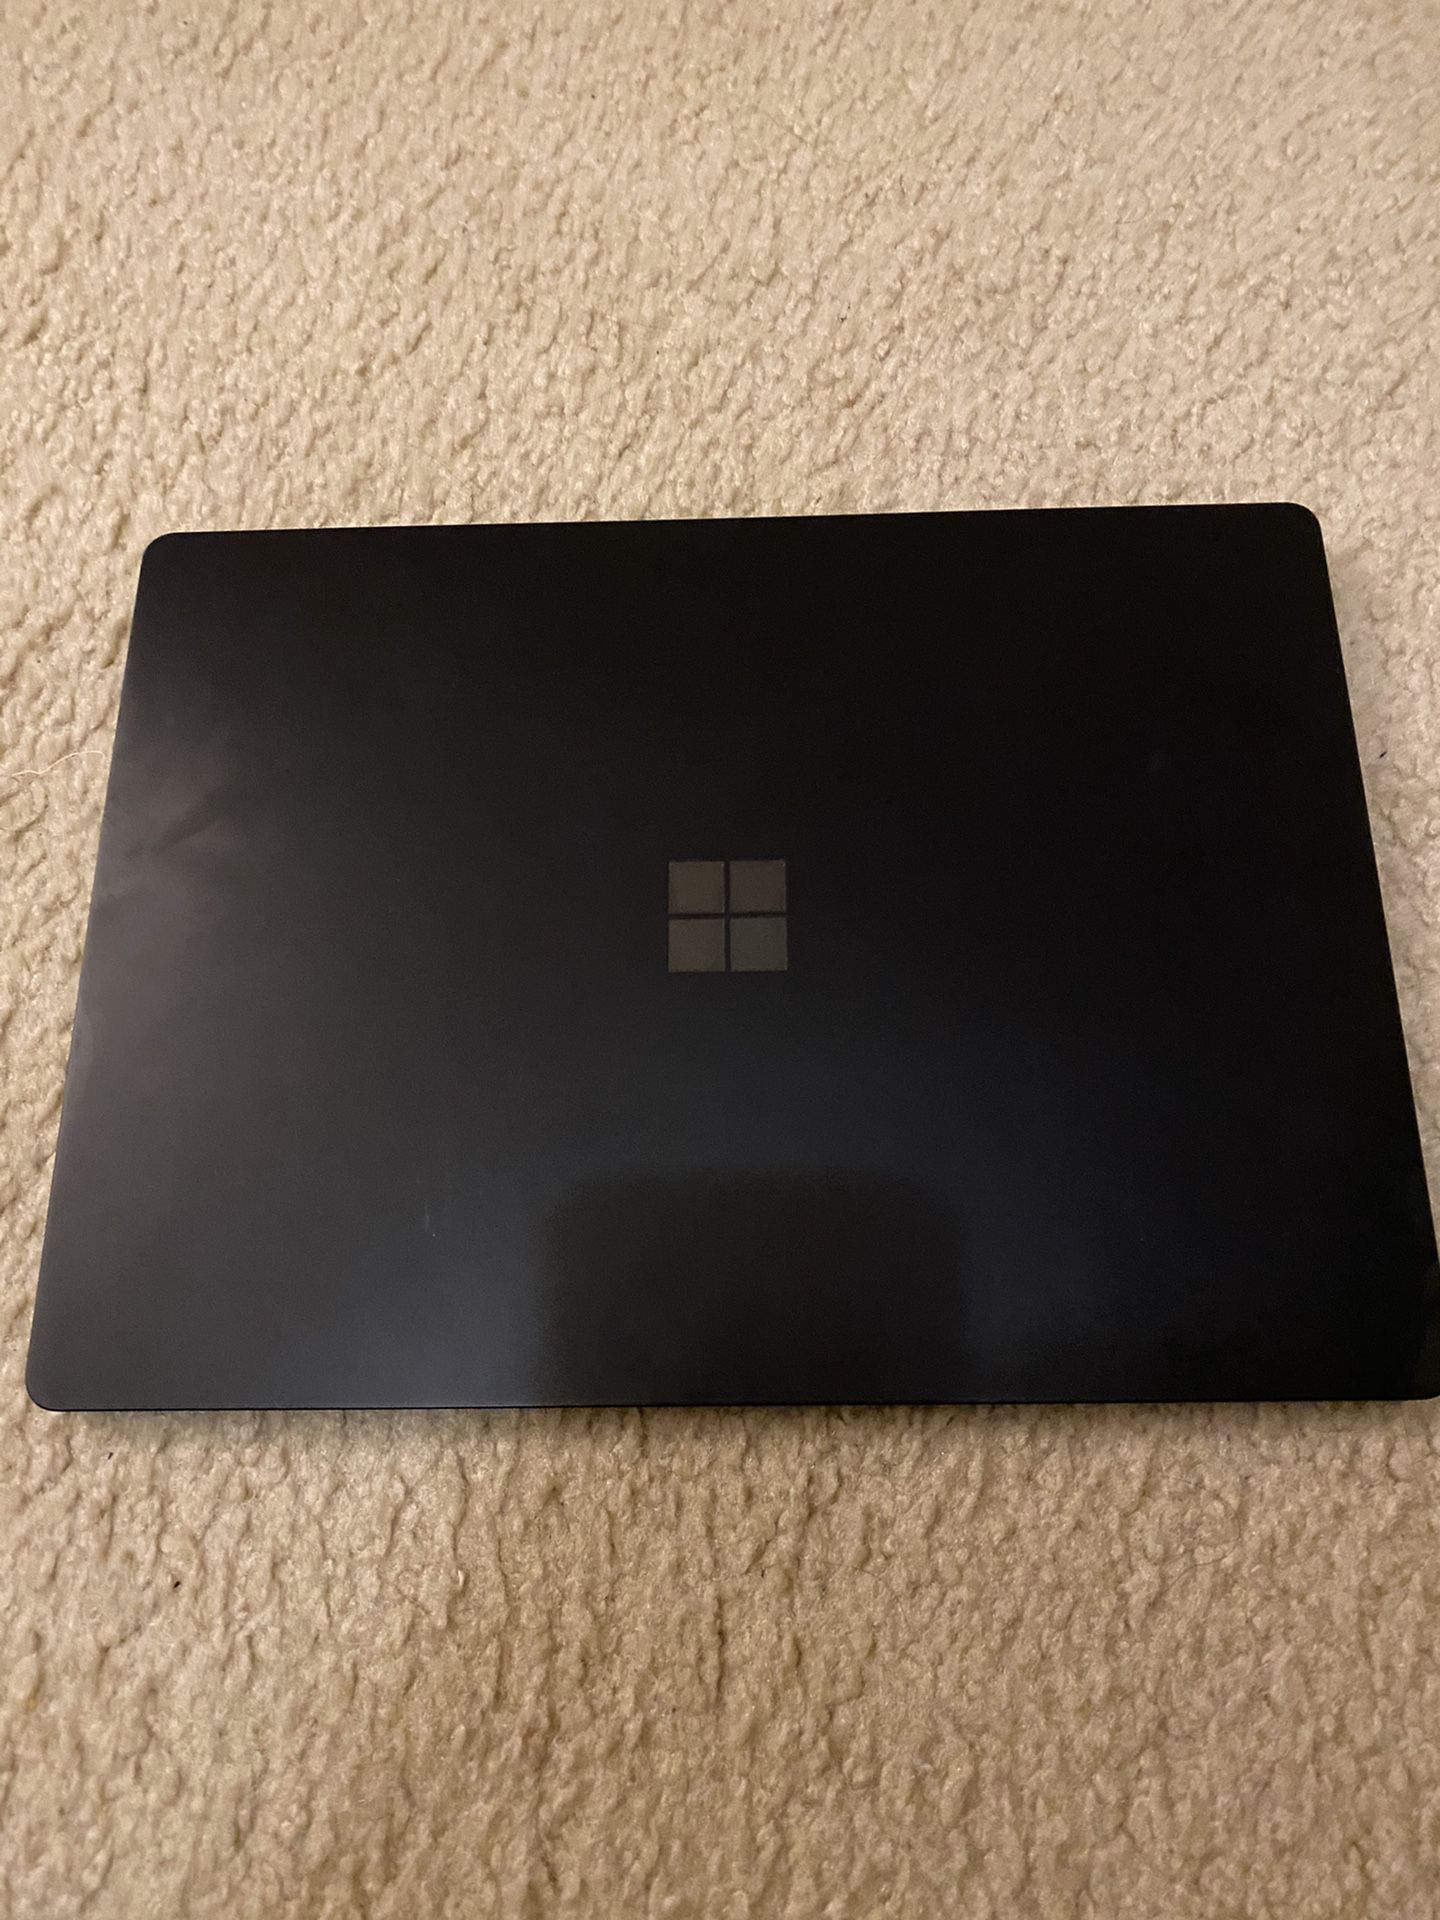 Surface Laptop 2 13 inches i5 256GB